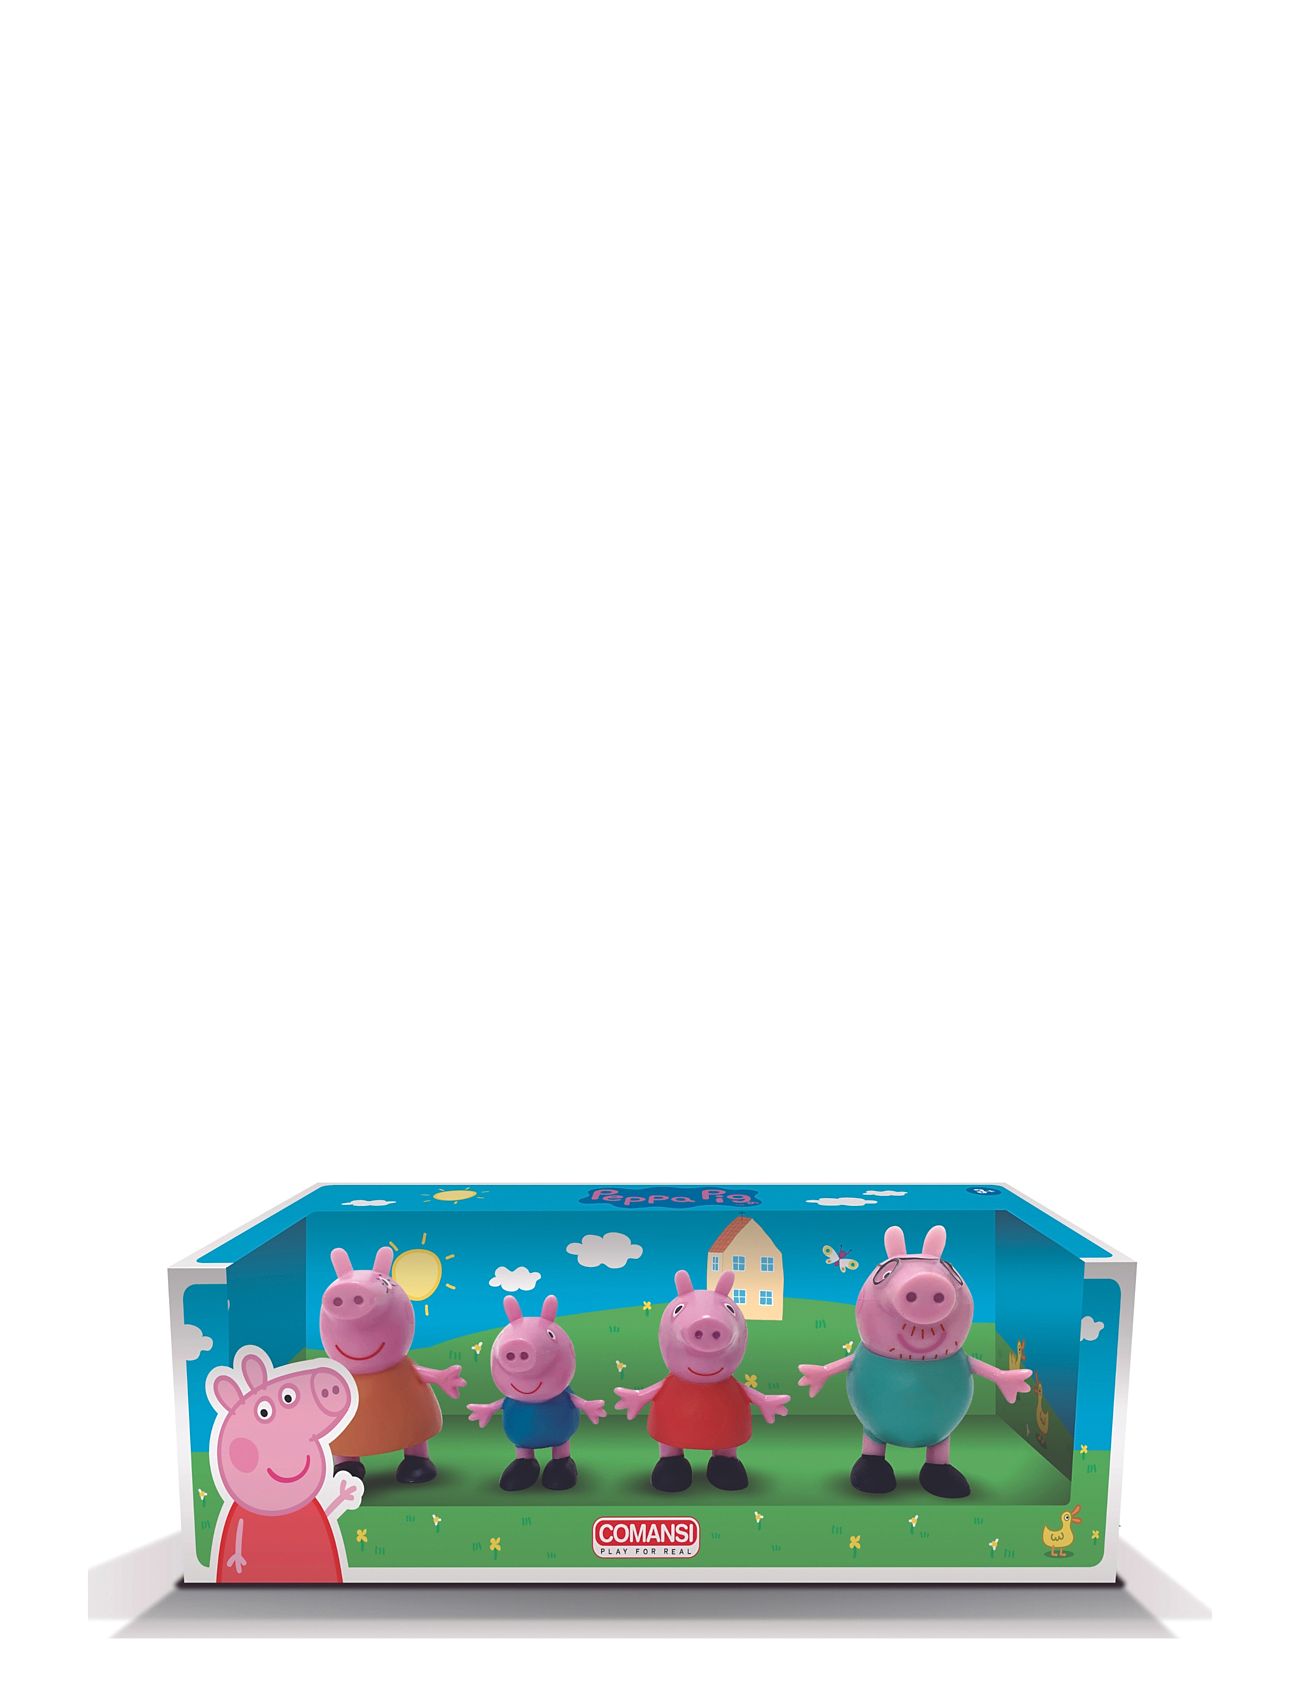 Peppa Pig Gift Box Set 4 Figur Toys Playsets & Action Figures Movies & Fairy Tale Characters Multi/patterned Comansi